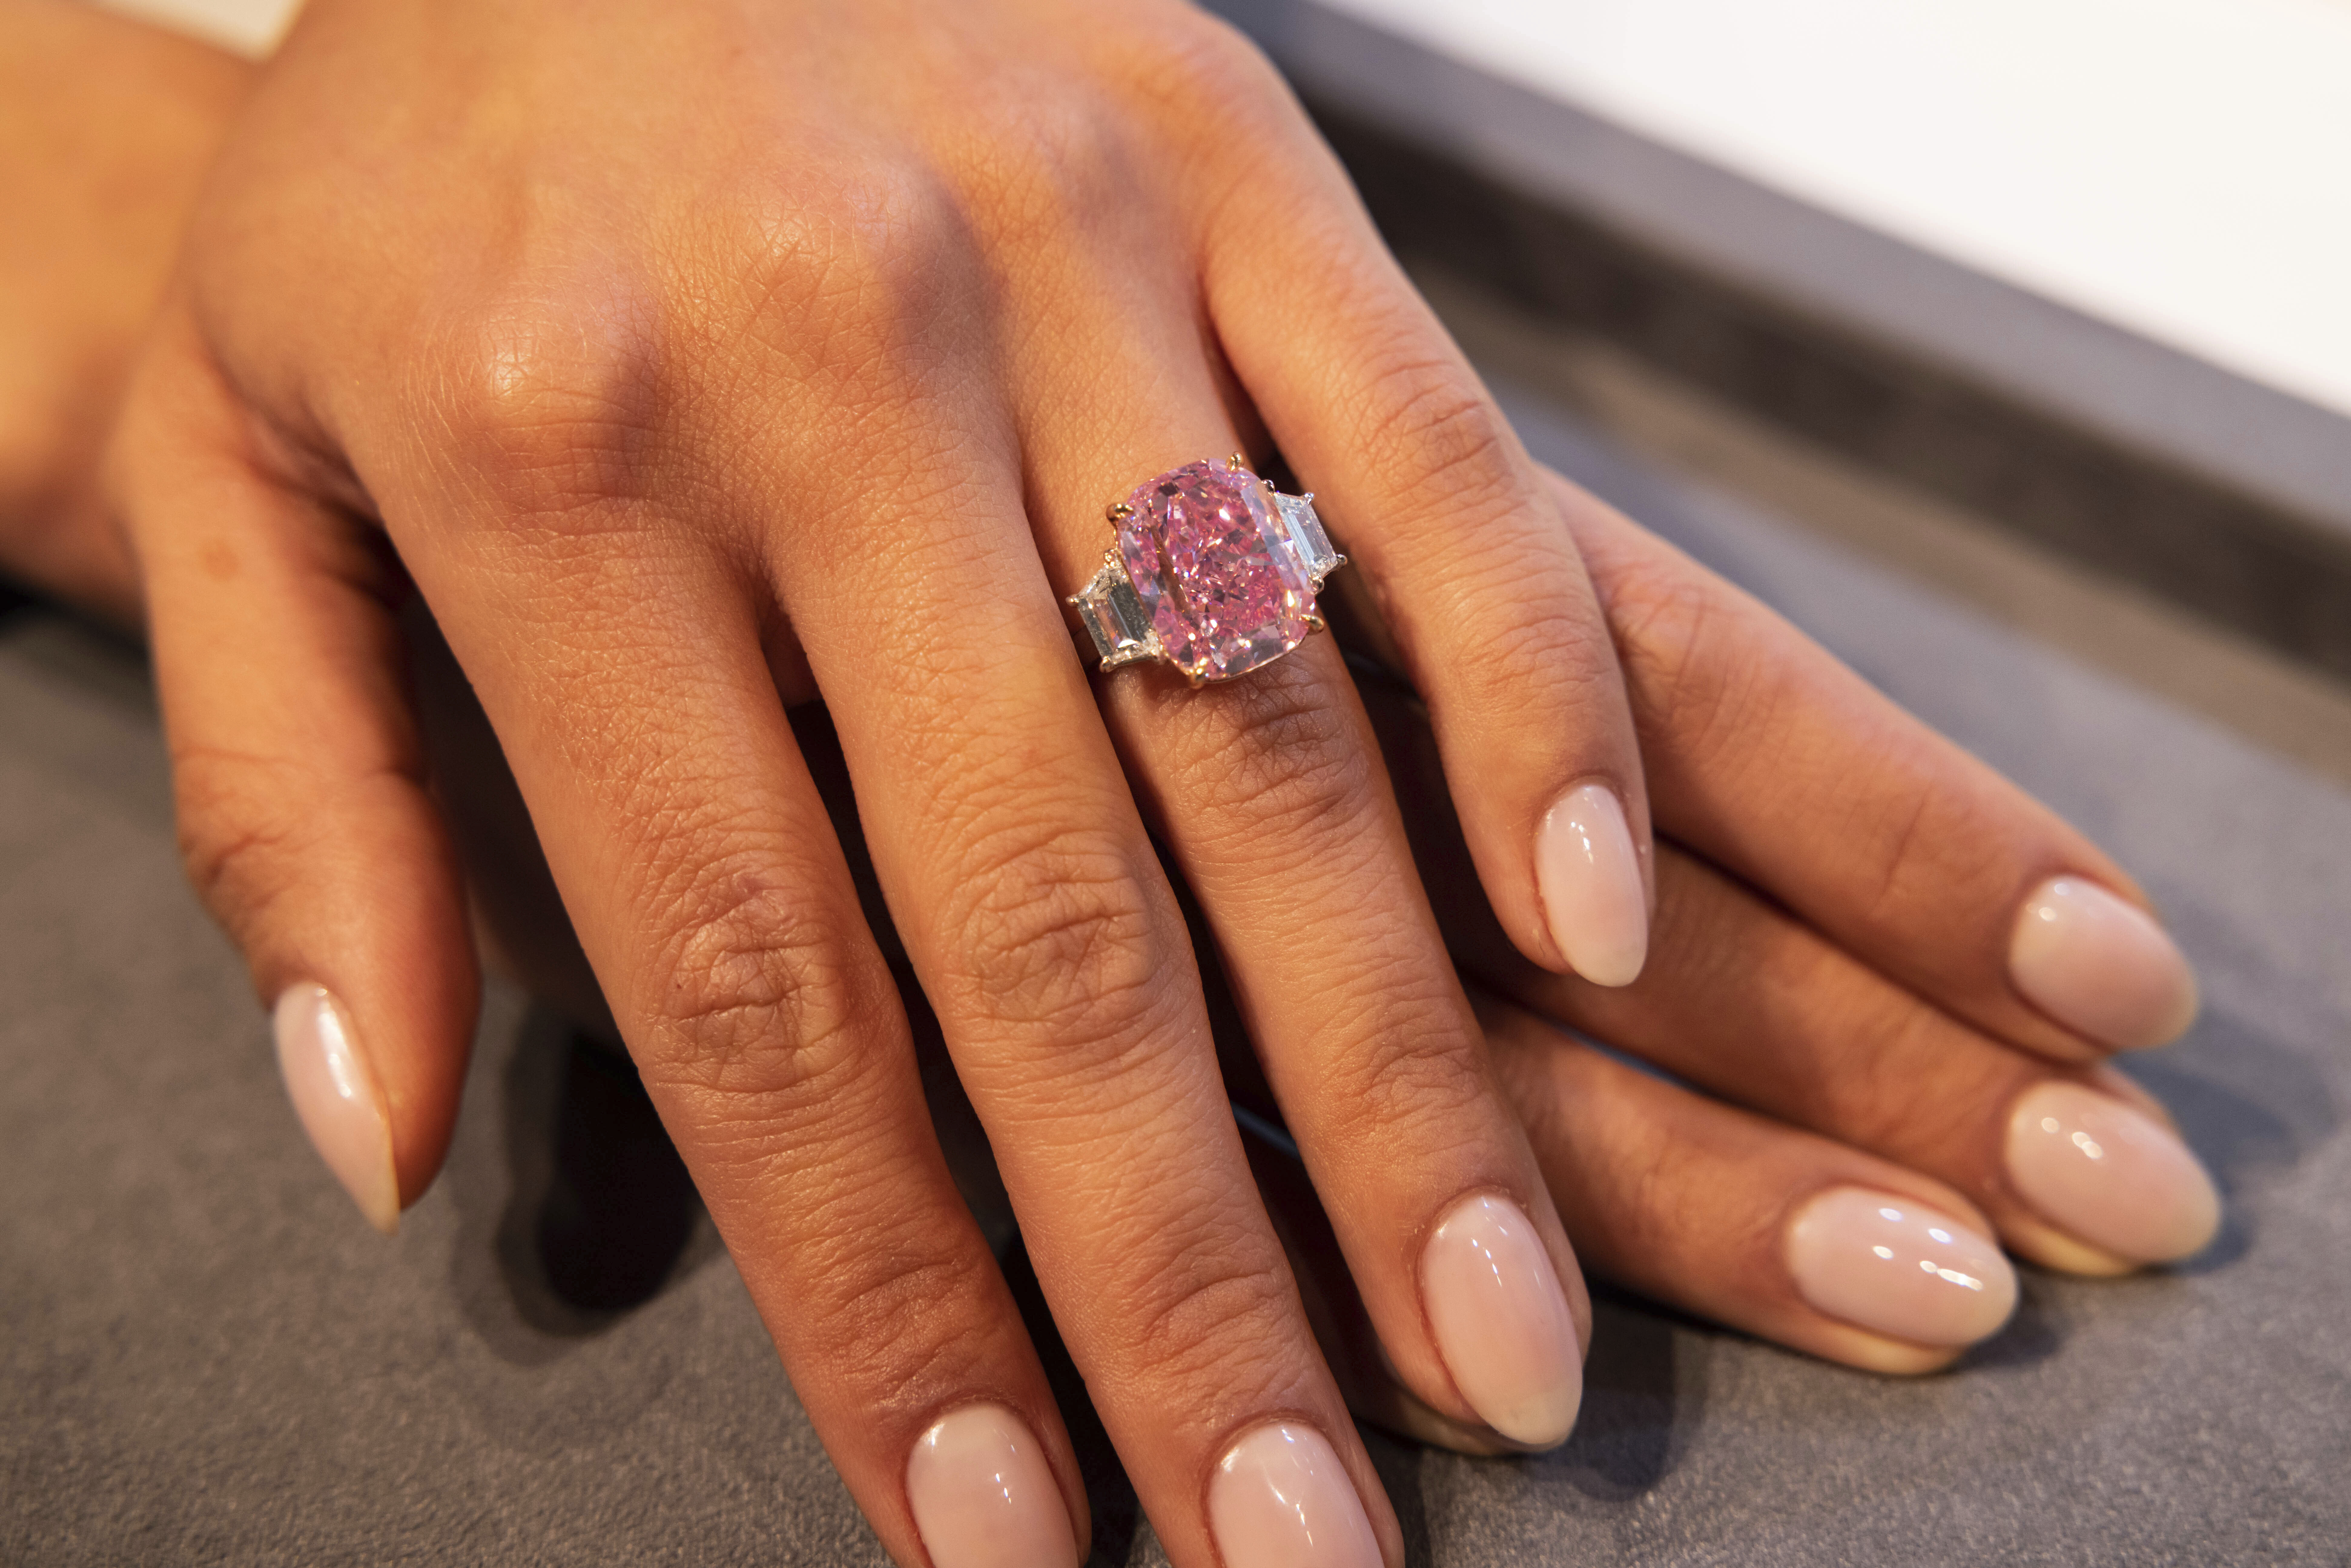 Pink Star Diamond - The Most Expensive Gemstone Ever Sold?